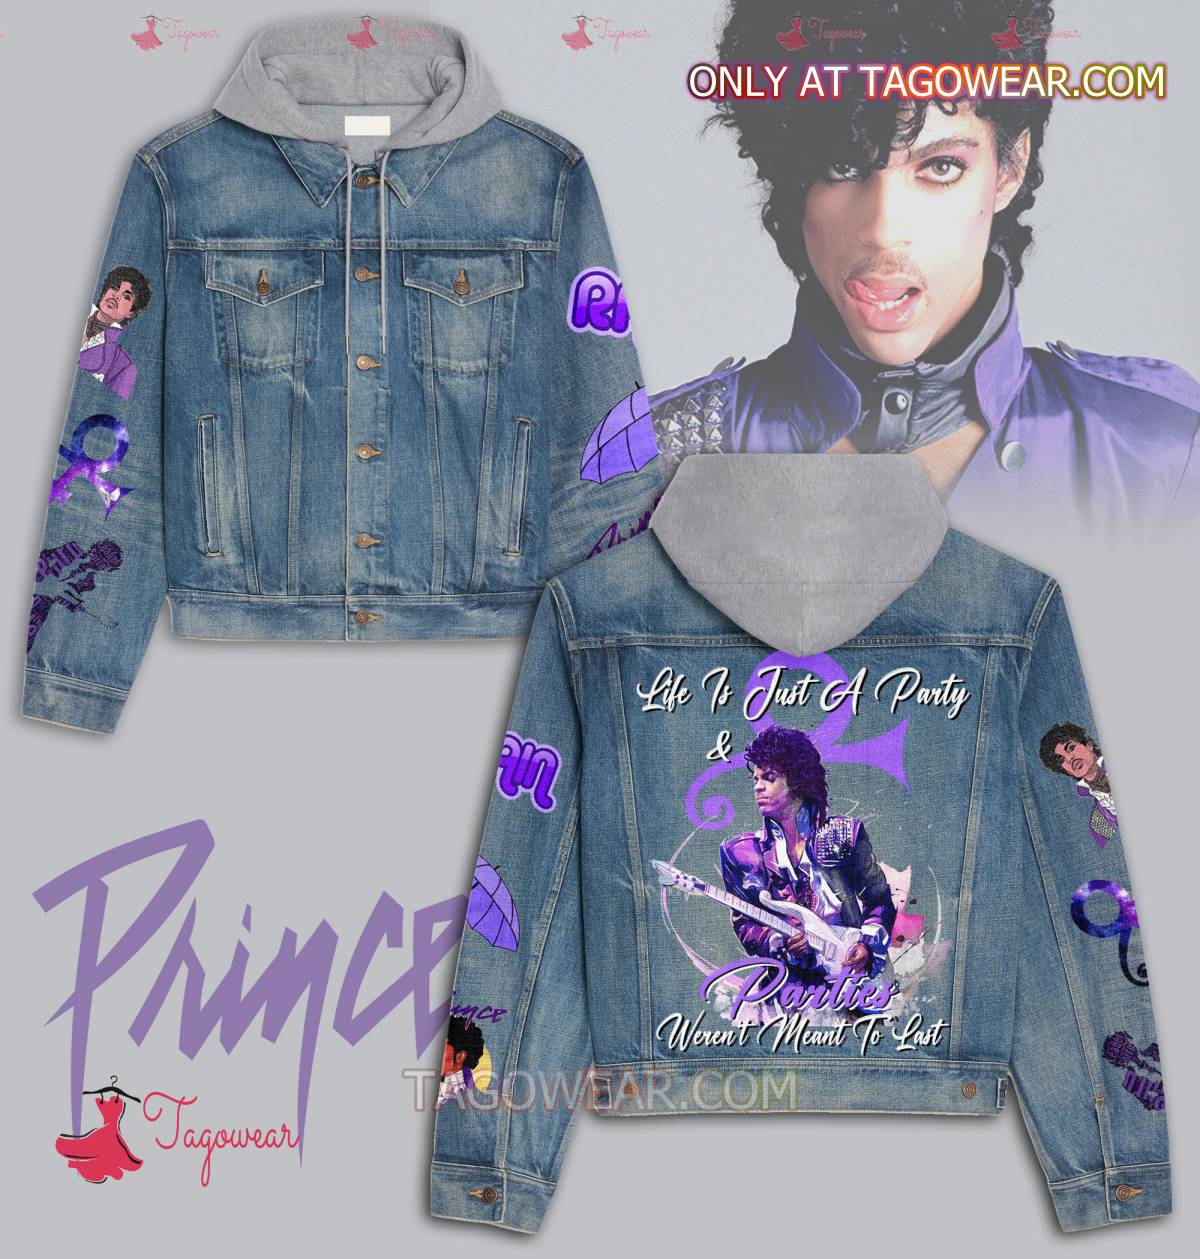 Prince Life Is Just A Party And Parties Weren't Meant To Last Jean Hoodie Jacket